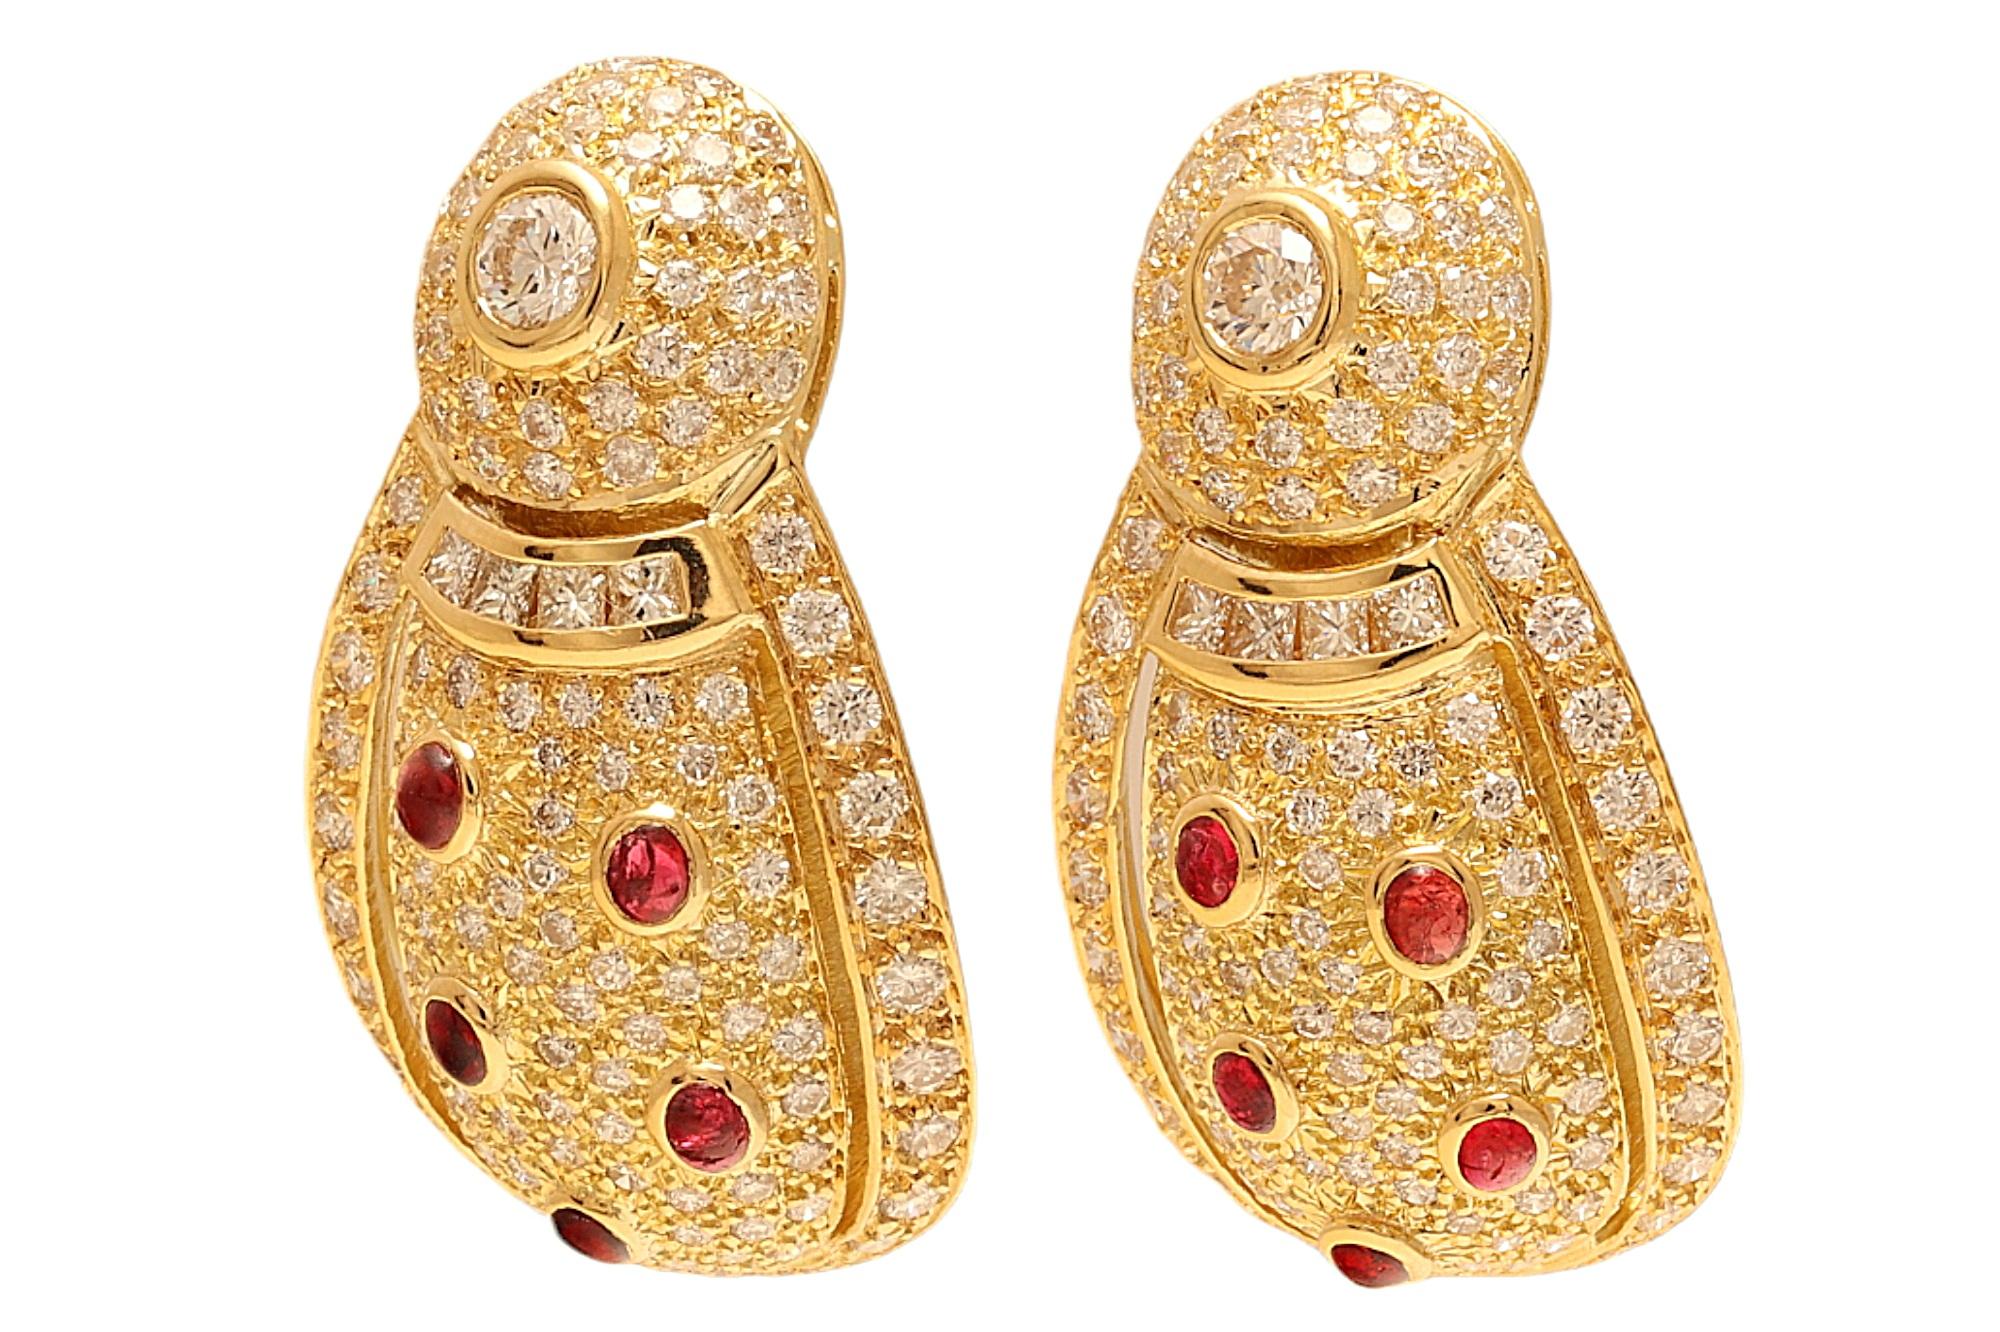 Gorgeous 18 kt. Yellow Gold Earrings, Possibly Depicting a Lady Bird with Diamonds & Ruby.

Diamonds: Brilliant cut diamonds together approx. 6.72 ct. Square cut diamonds together approx. 0.5 ct.

Ruby: 10 red cabochon rubies

Material: 18 kt.